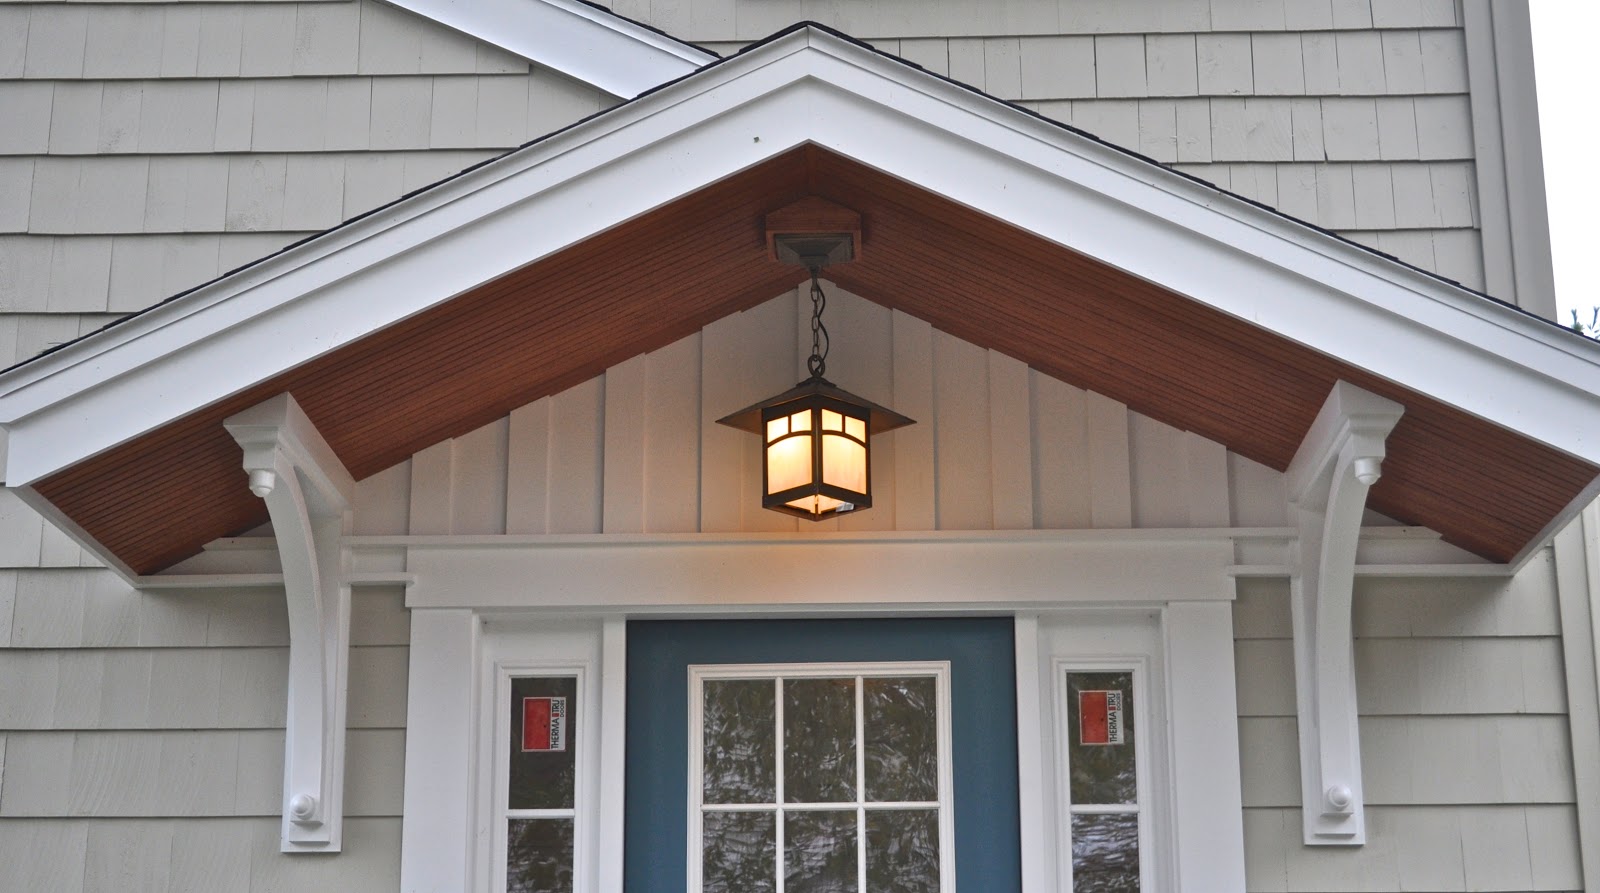 Craftsman Style Porch Light - Craftsman style porch light - Childrens Furniture Designs That Are Together  With Pdf Diy Mission Trestle